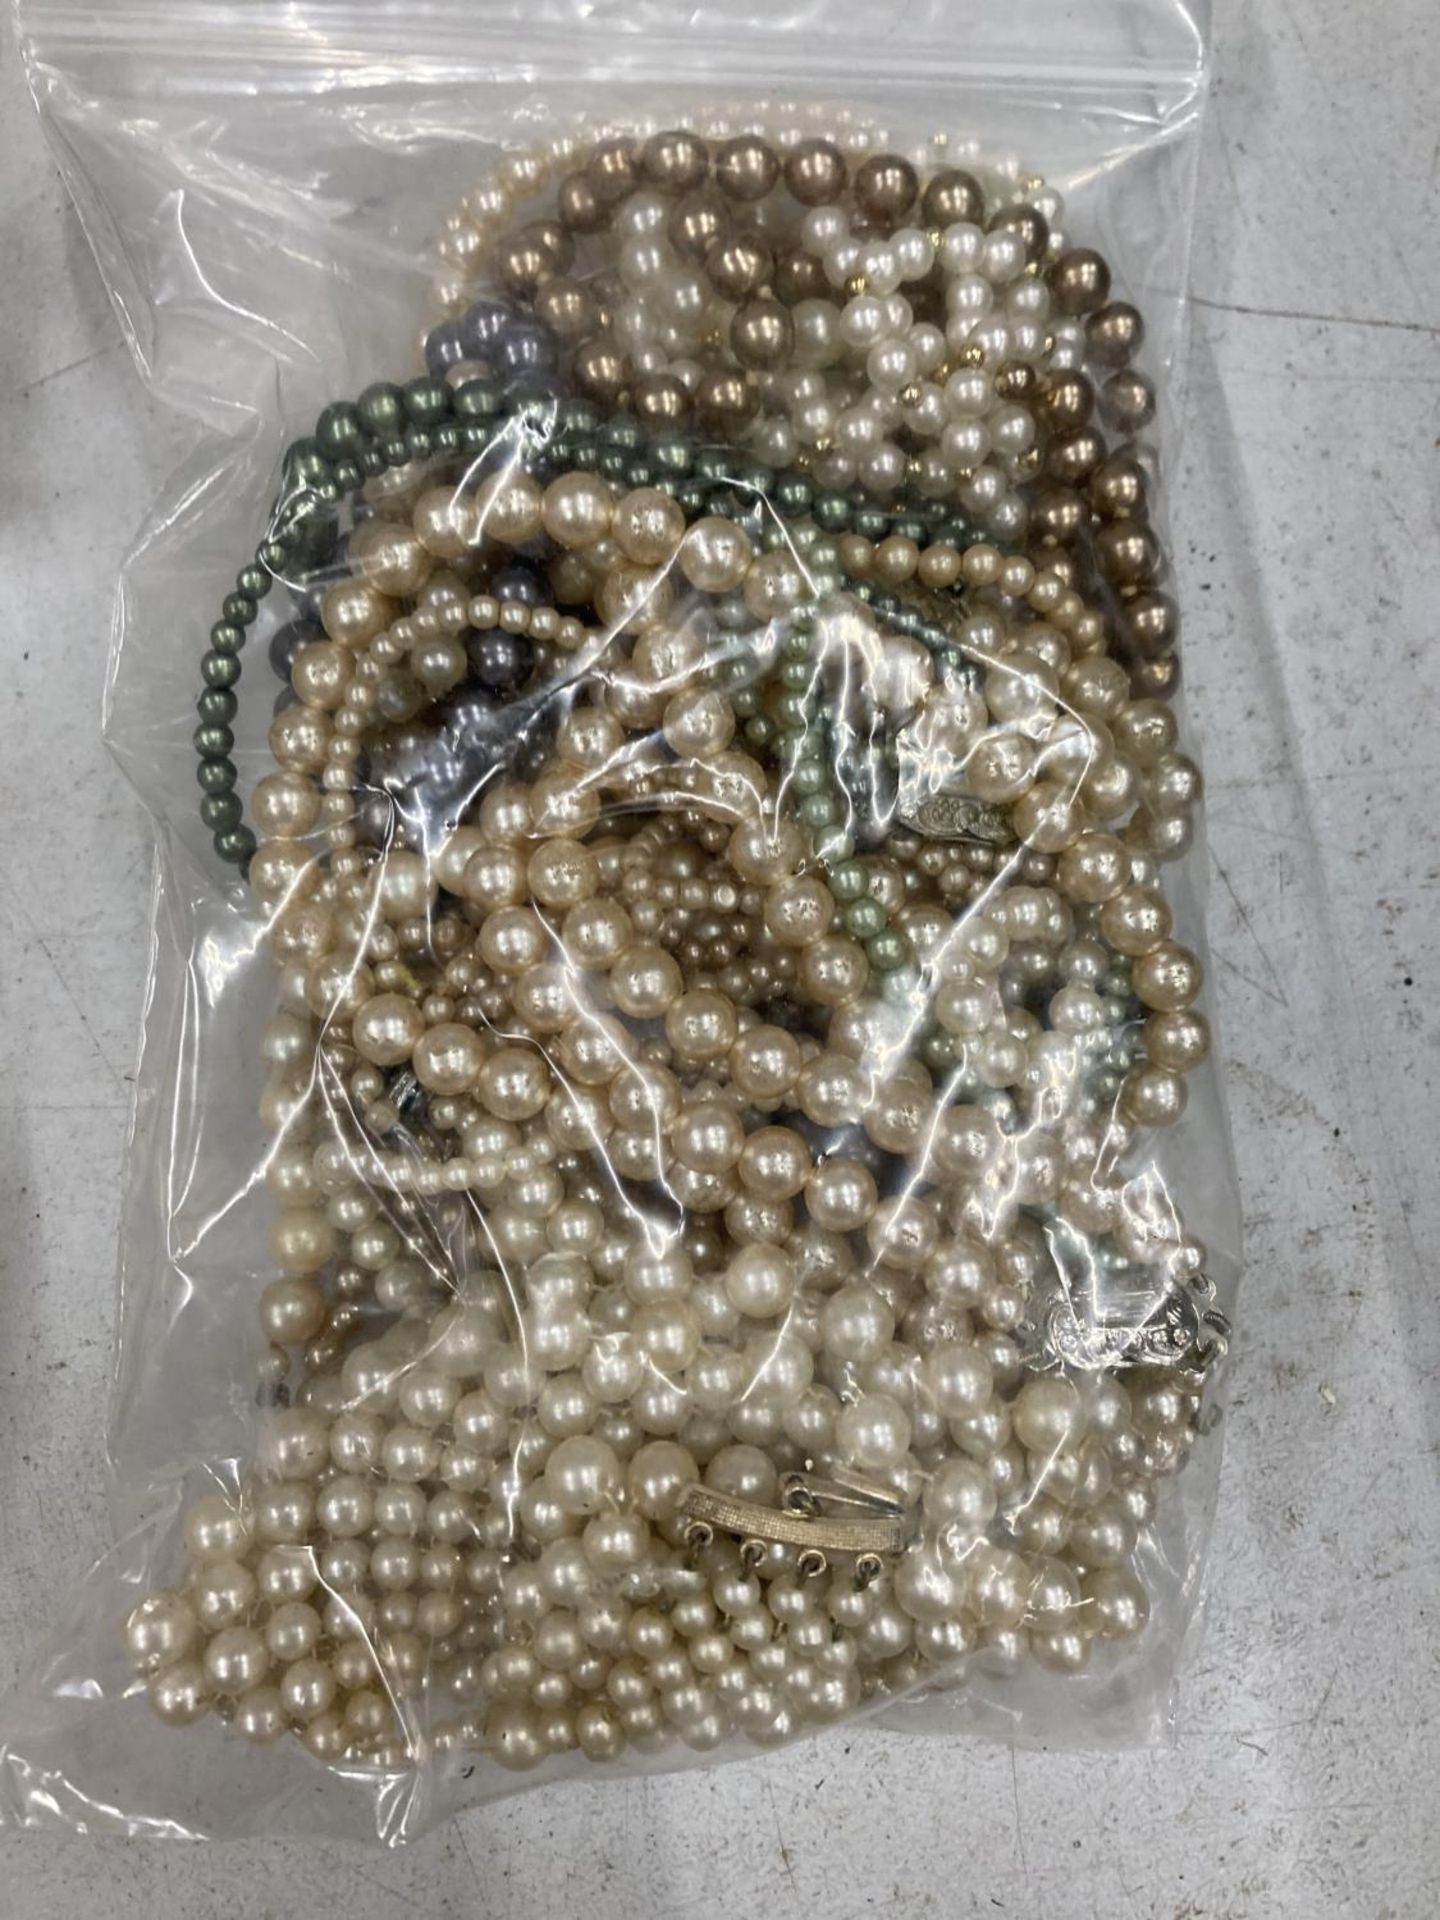 A LARGE QUANTITY OF PEARL NECKLACES